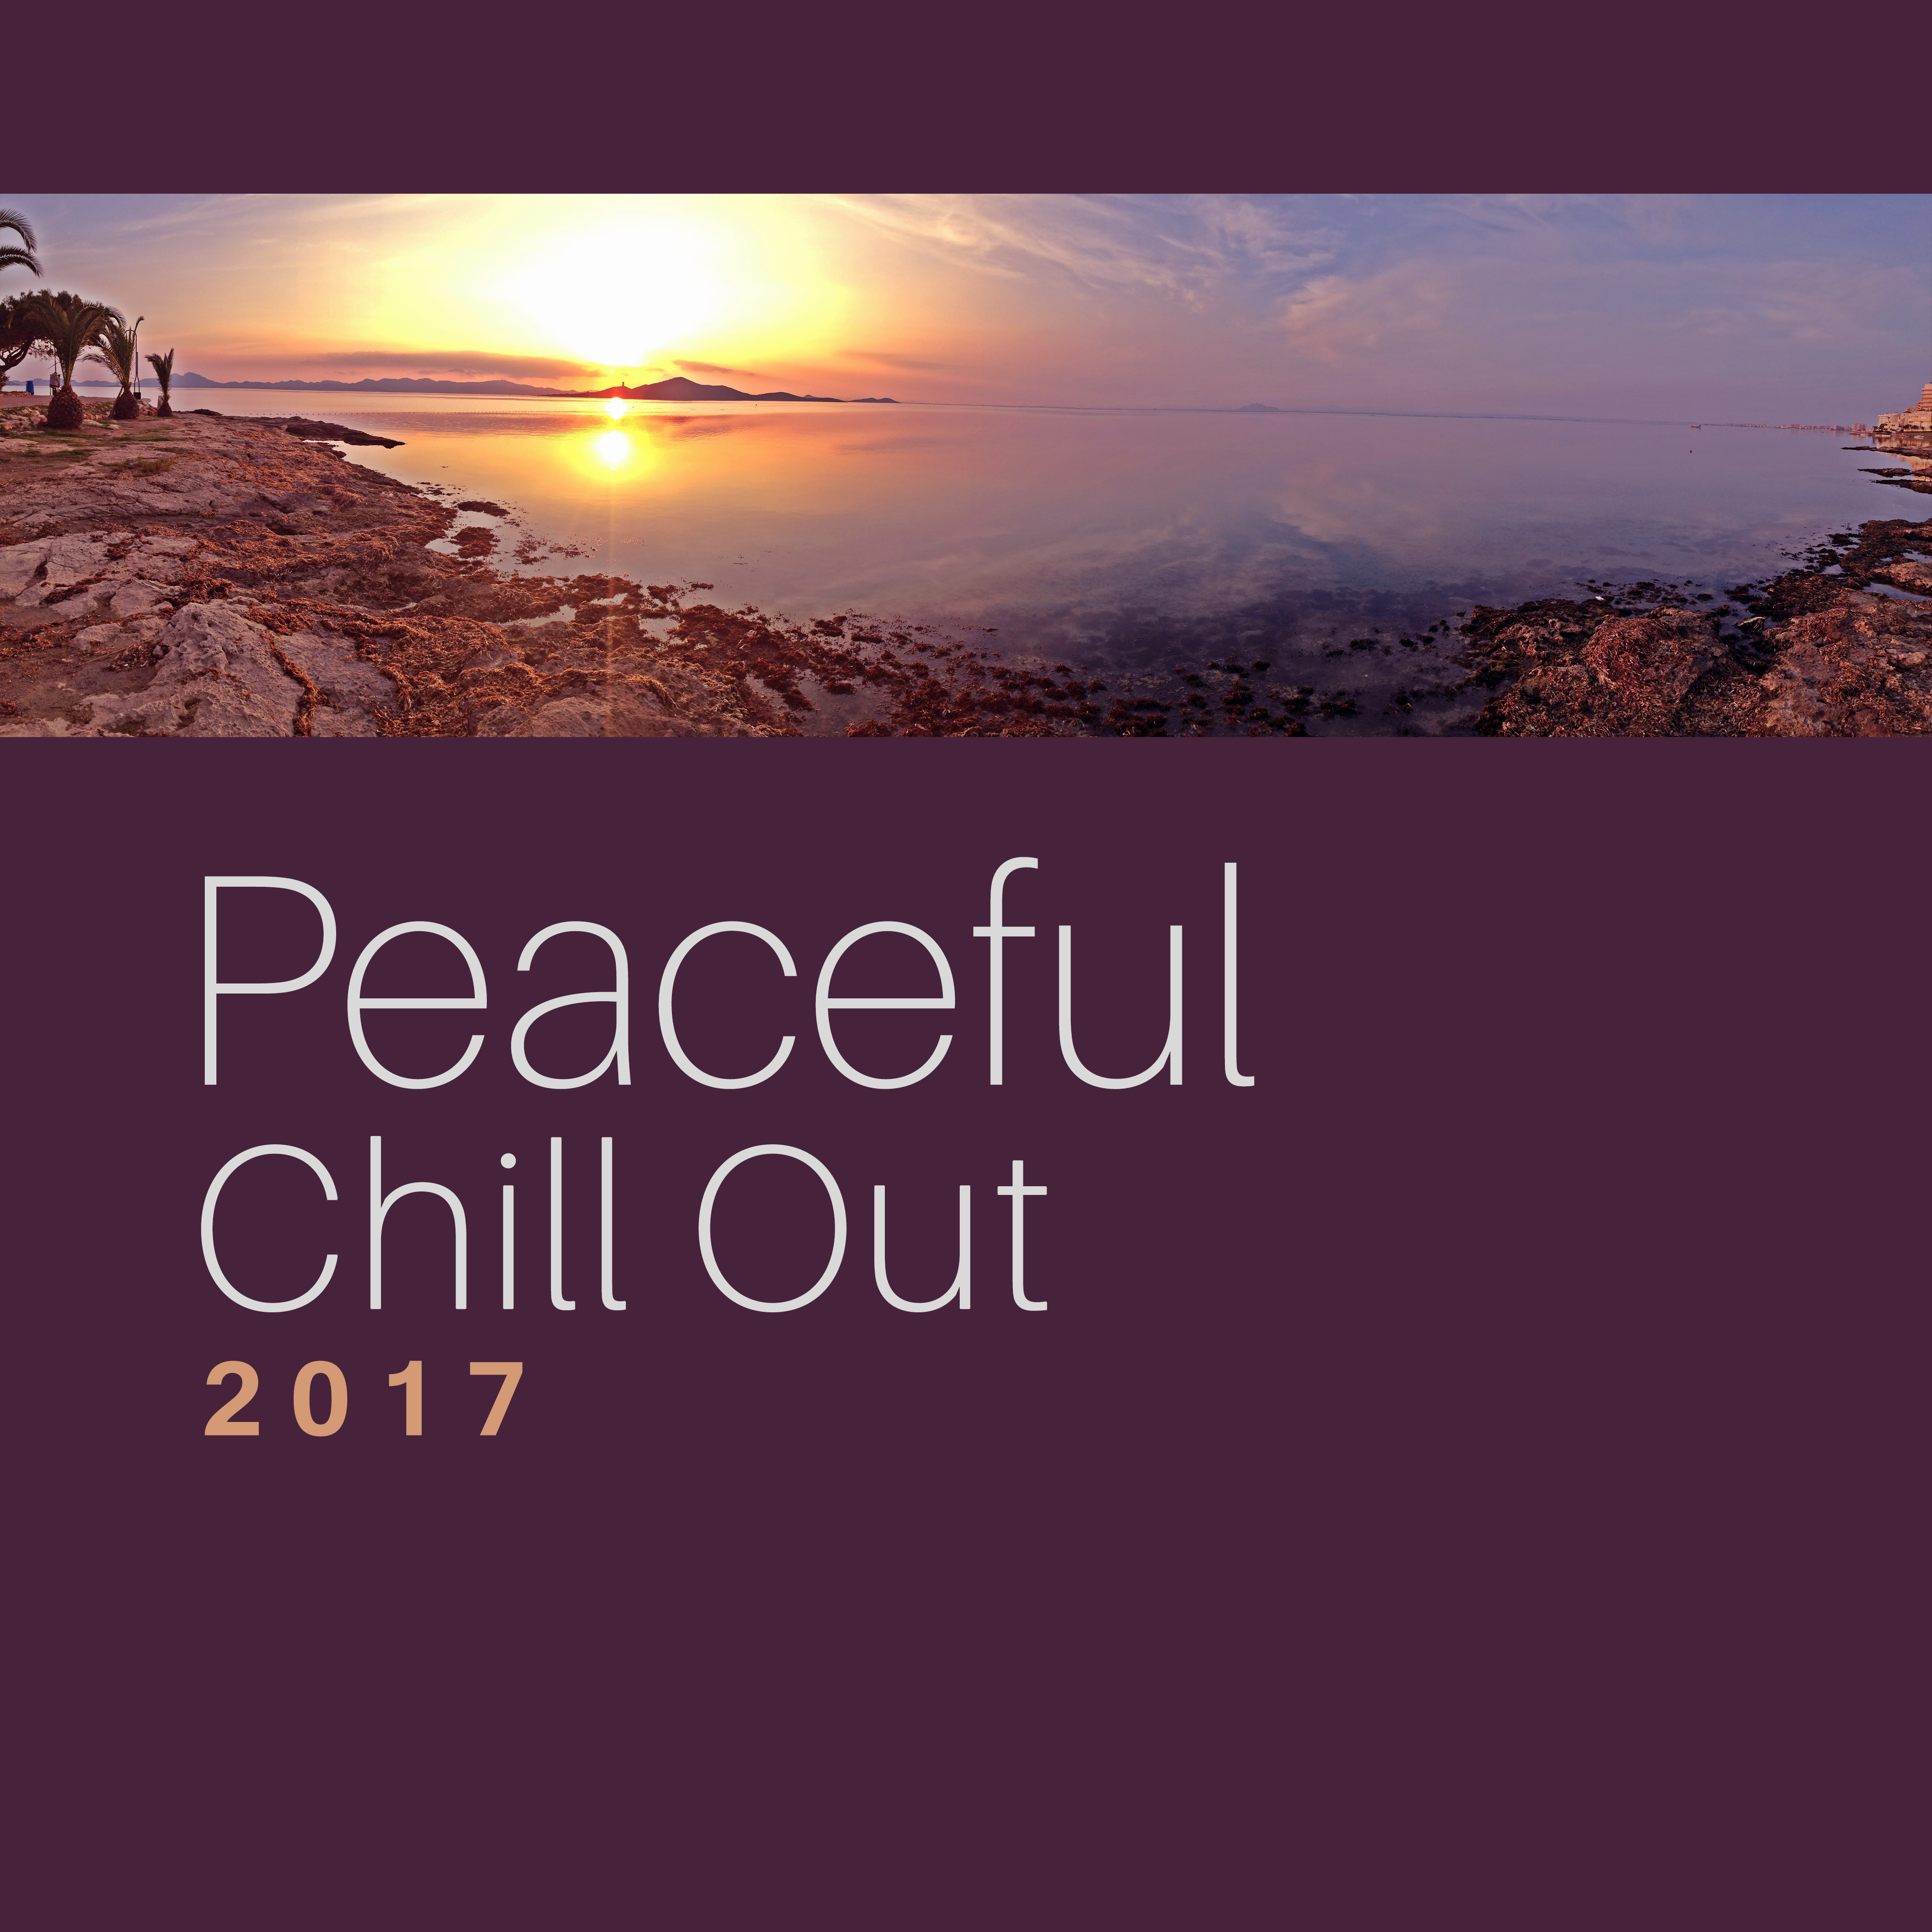 Peaceful Chill Out 2017 – Summertime, Beach Chill, Stress Free, Relaxation, Chill Out Music to Calm Down, Soft Vibes